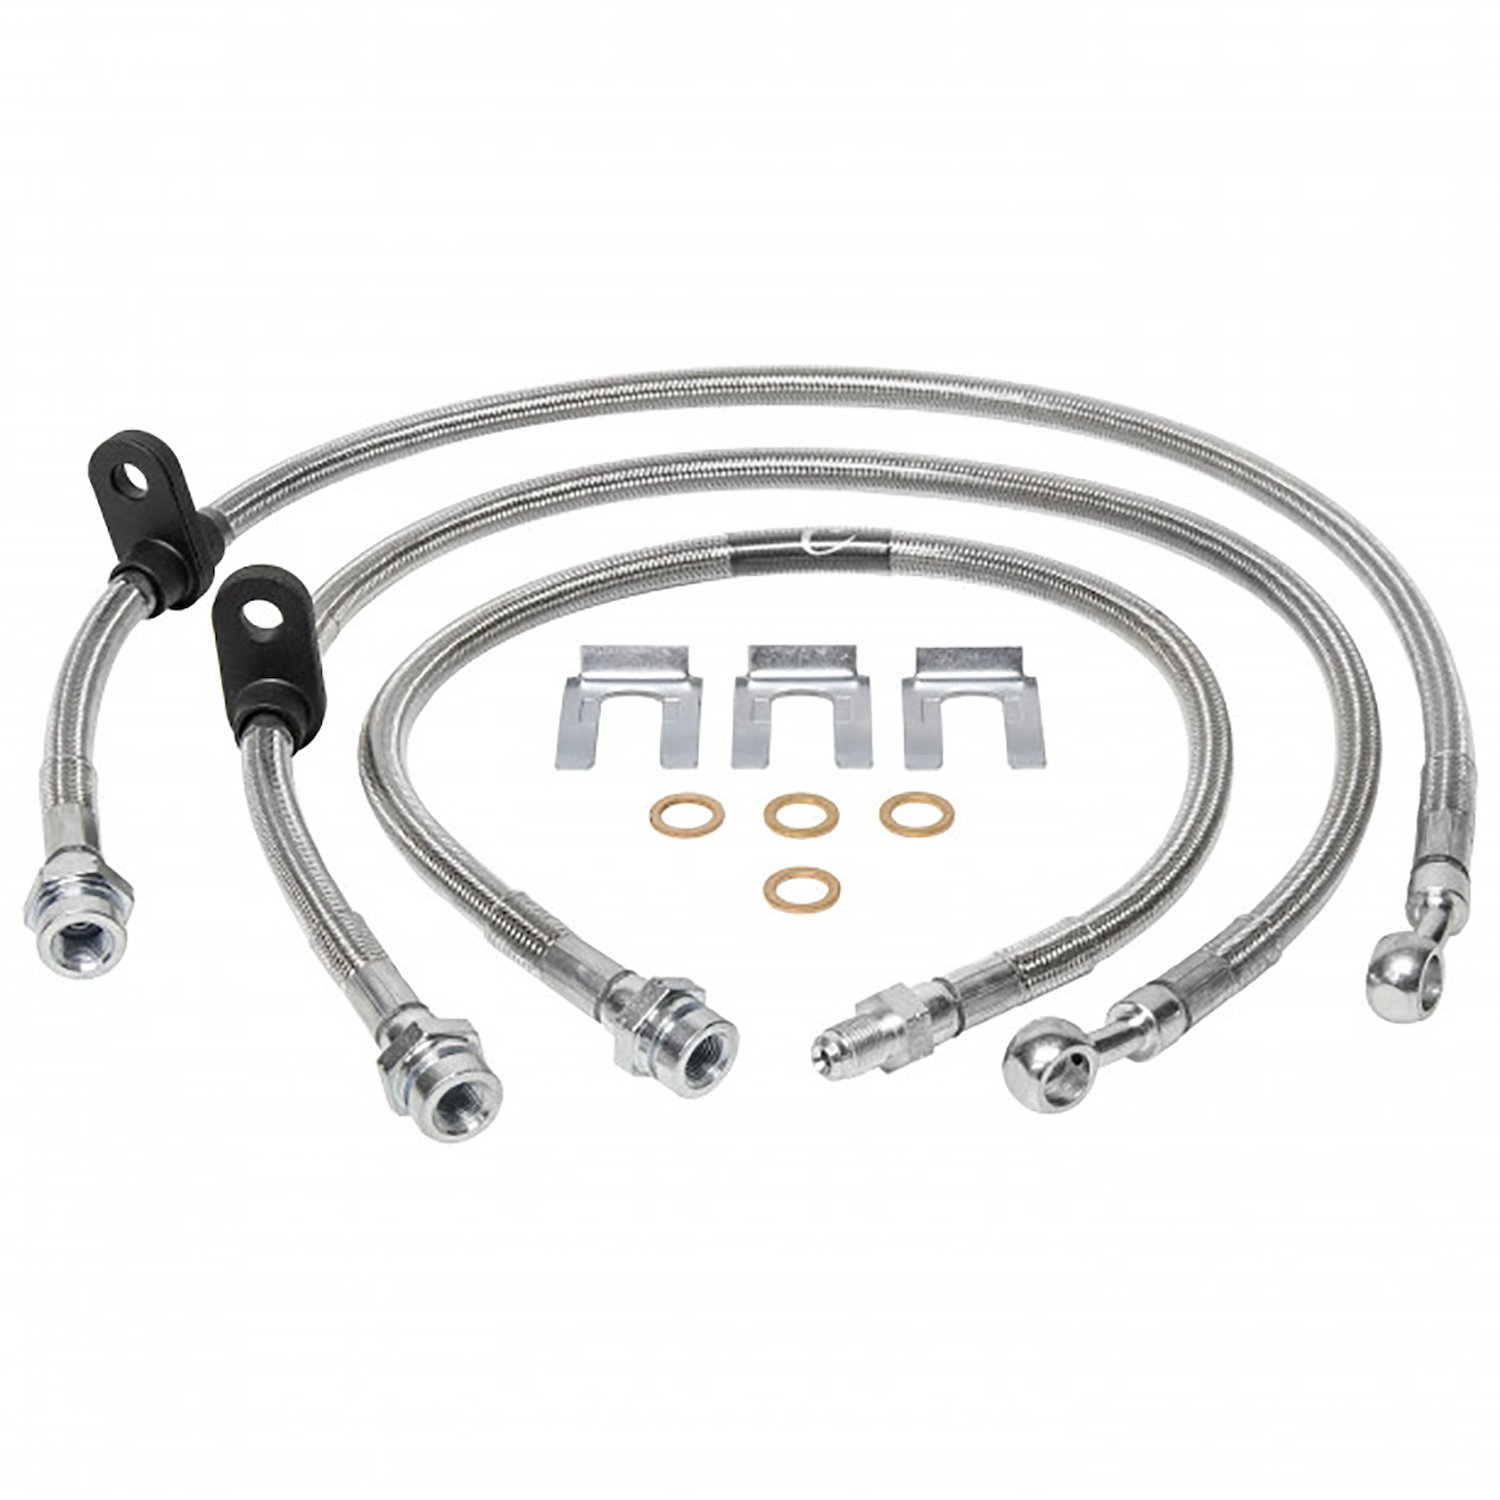 Extended Brake Line Kit for 1995.5-2004 Toyota Tacoma w/ 2 in. Lift